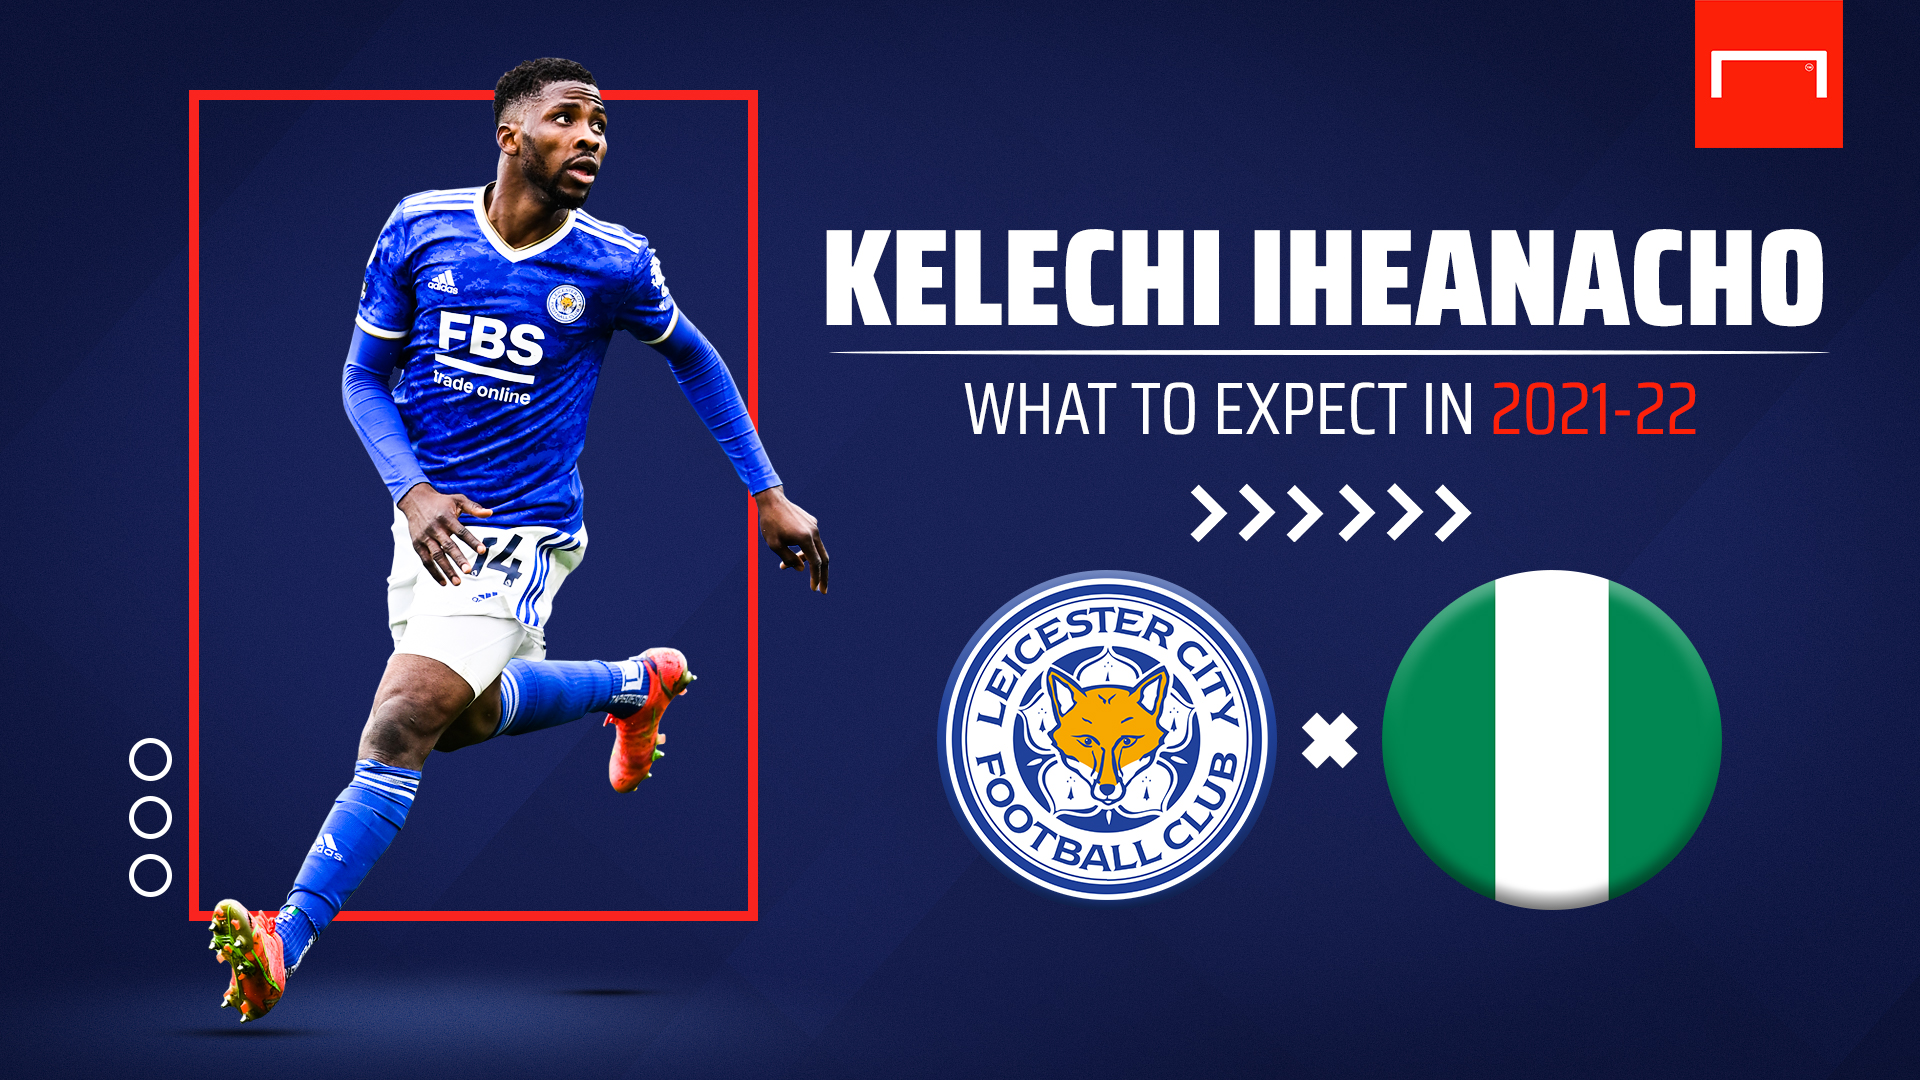 Kelechi Iheanacho: What to expect in 2021-22